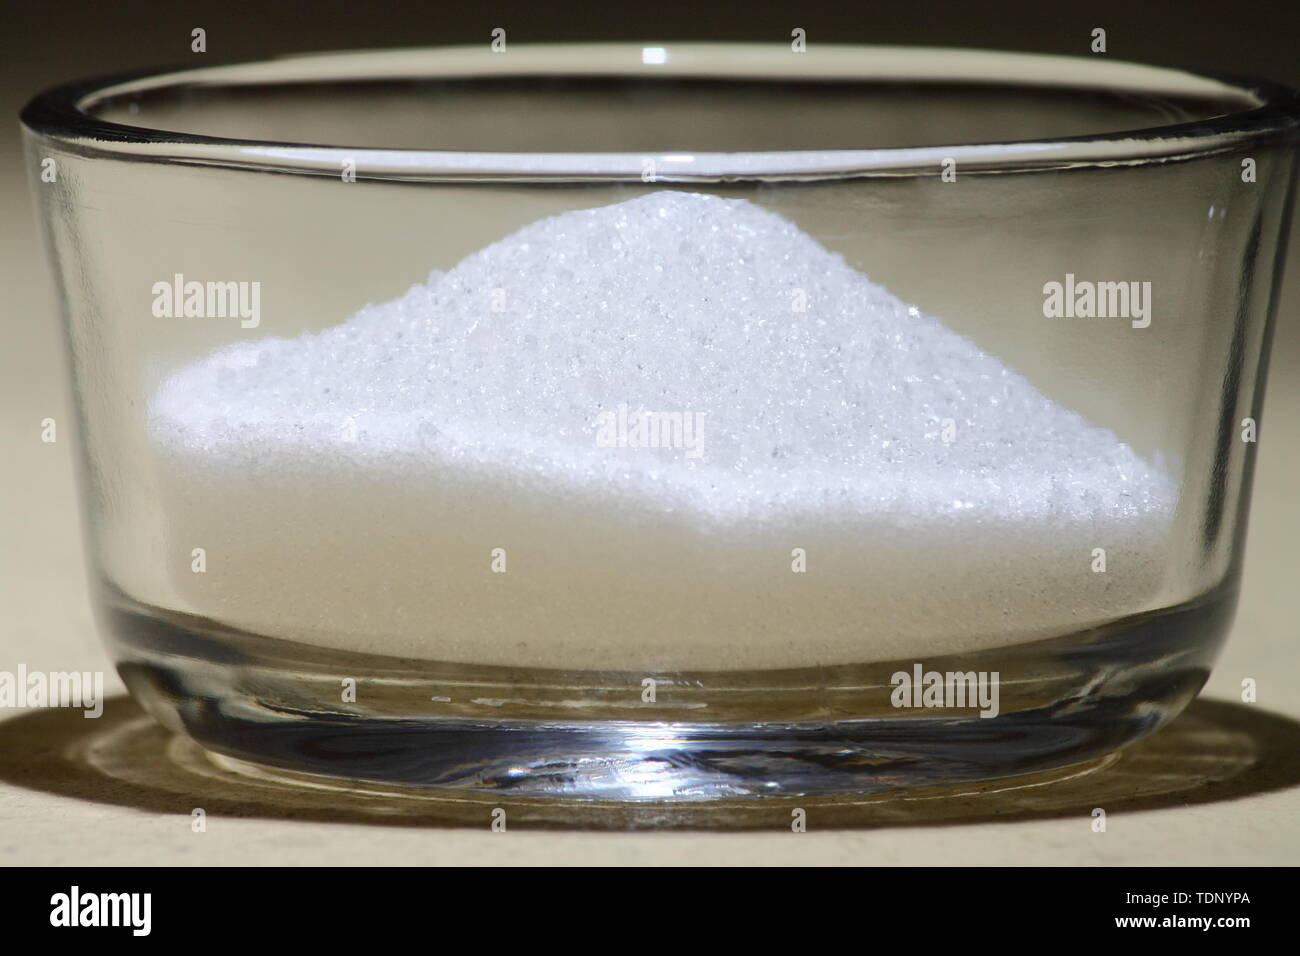 Closeup of a pile of sugar in a cup-sized glass container Stock Photo